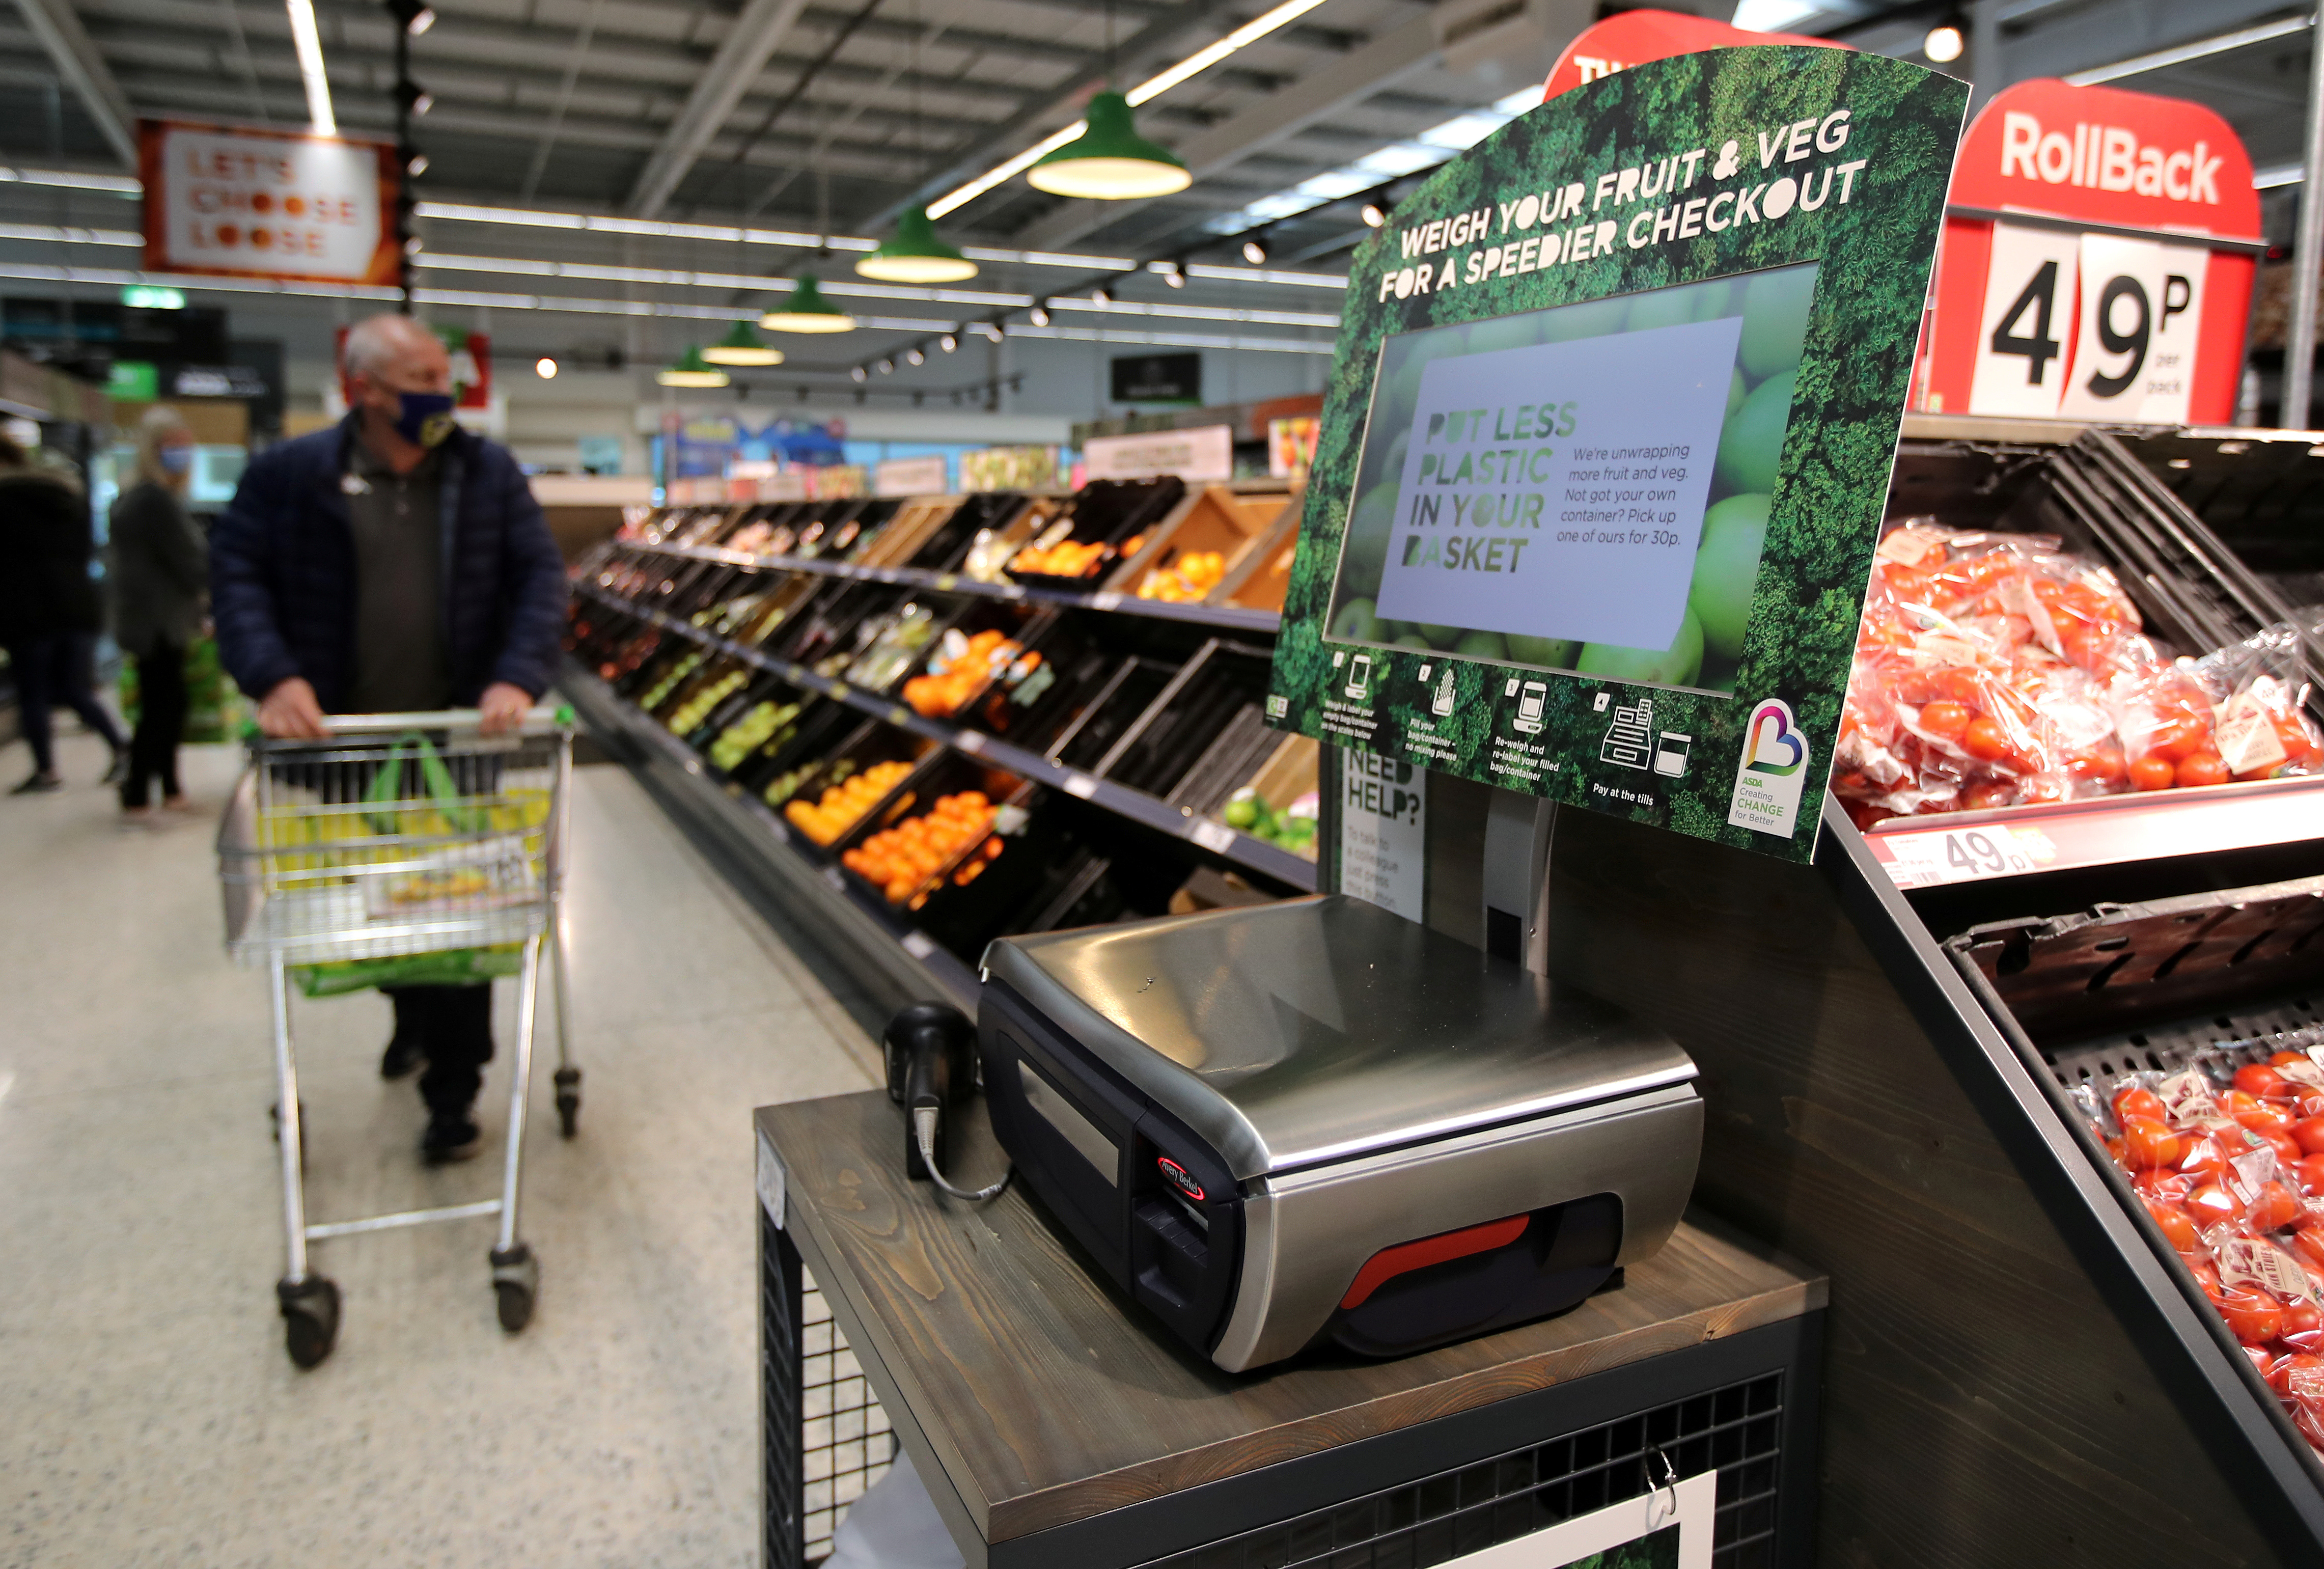 Scales to weigh loose fresh produce are seen in the UK supermarket Asda in Leeds